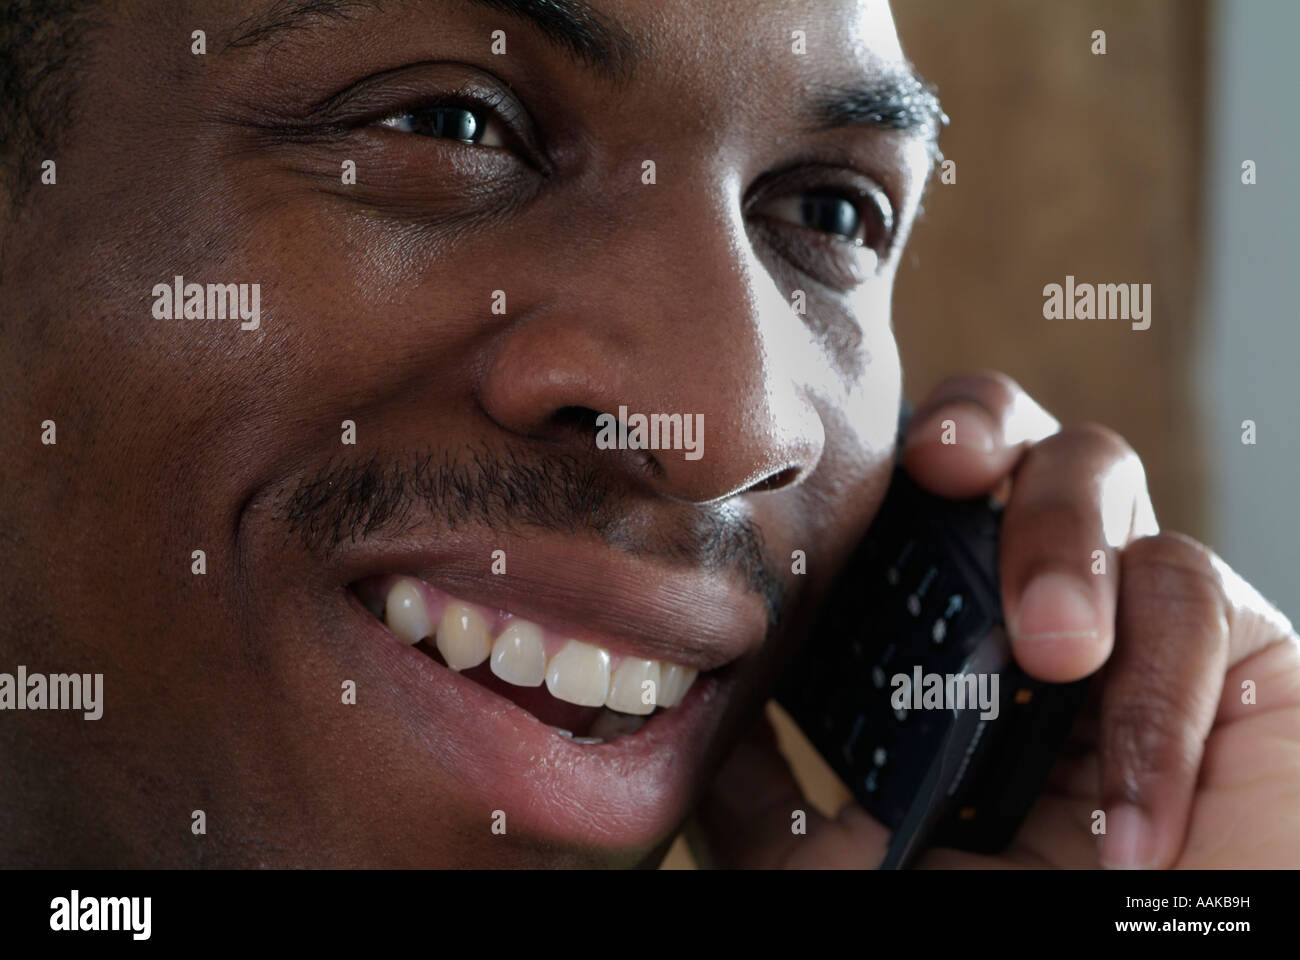 Man on Cell Phone Stock Photo